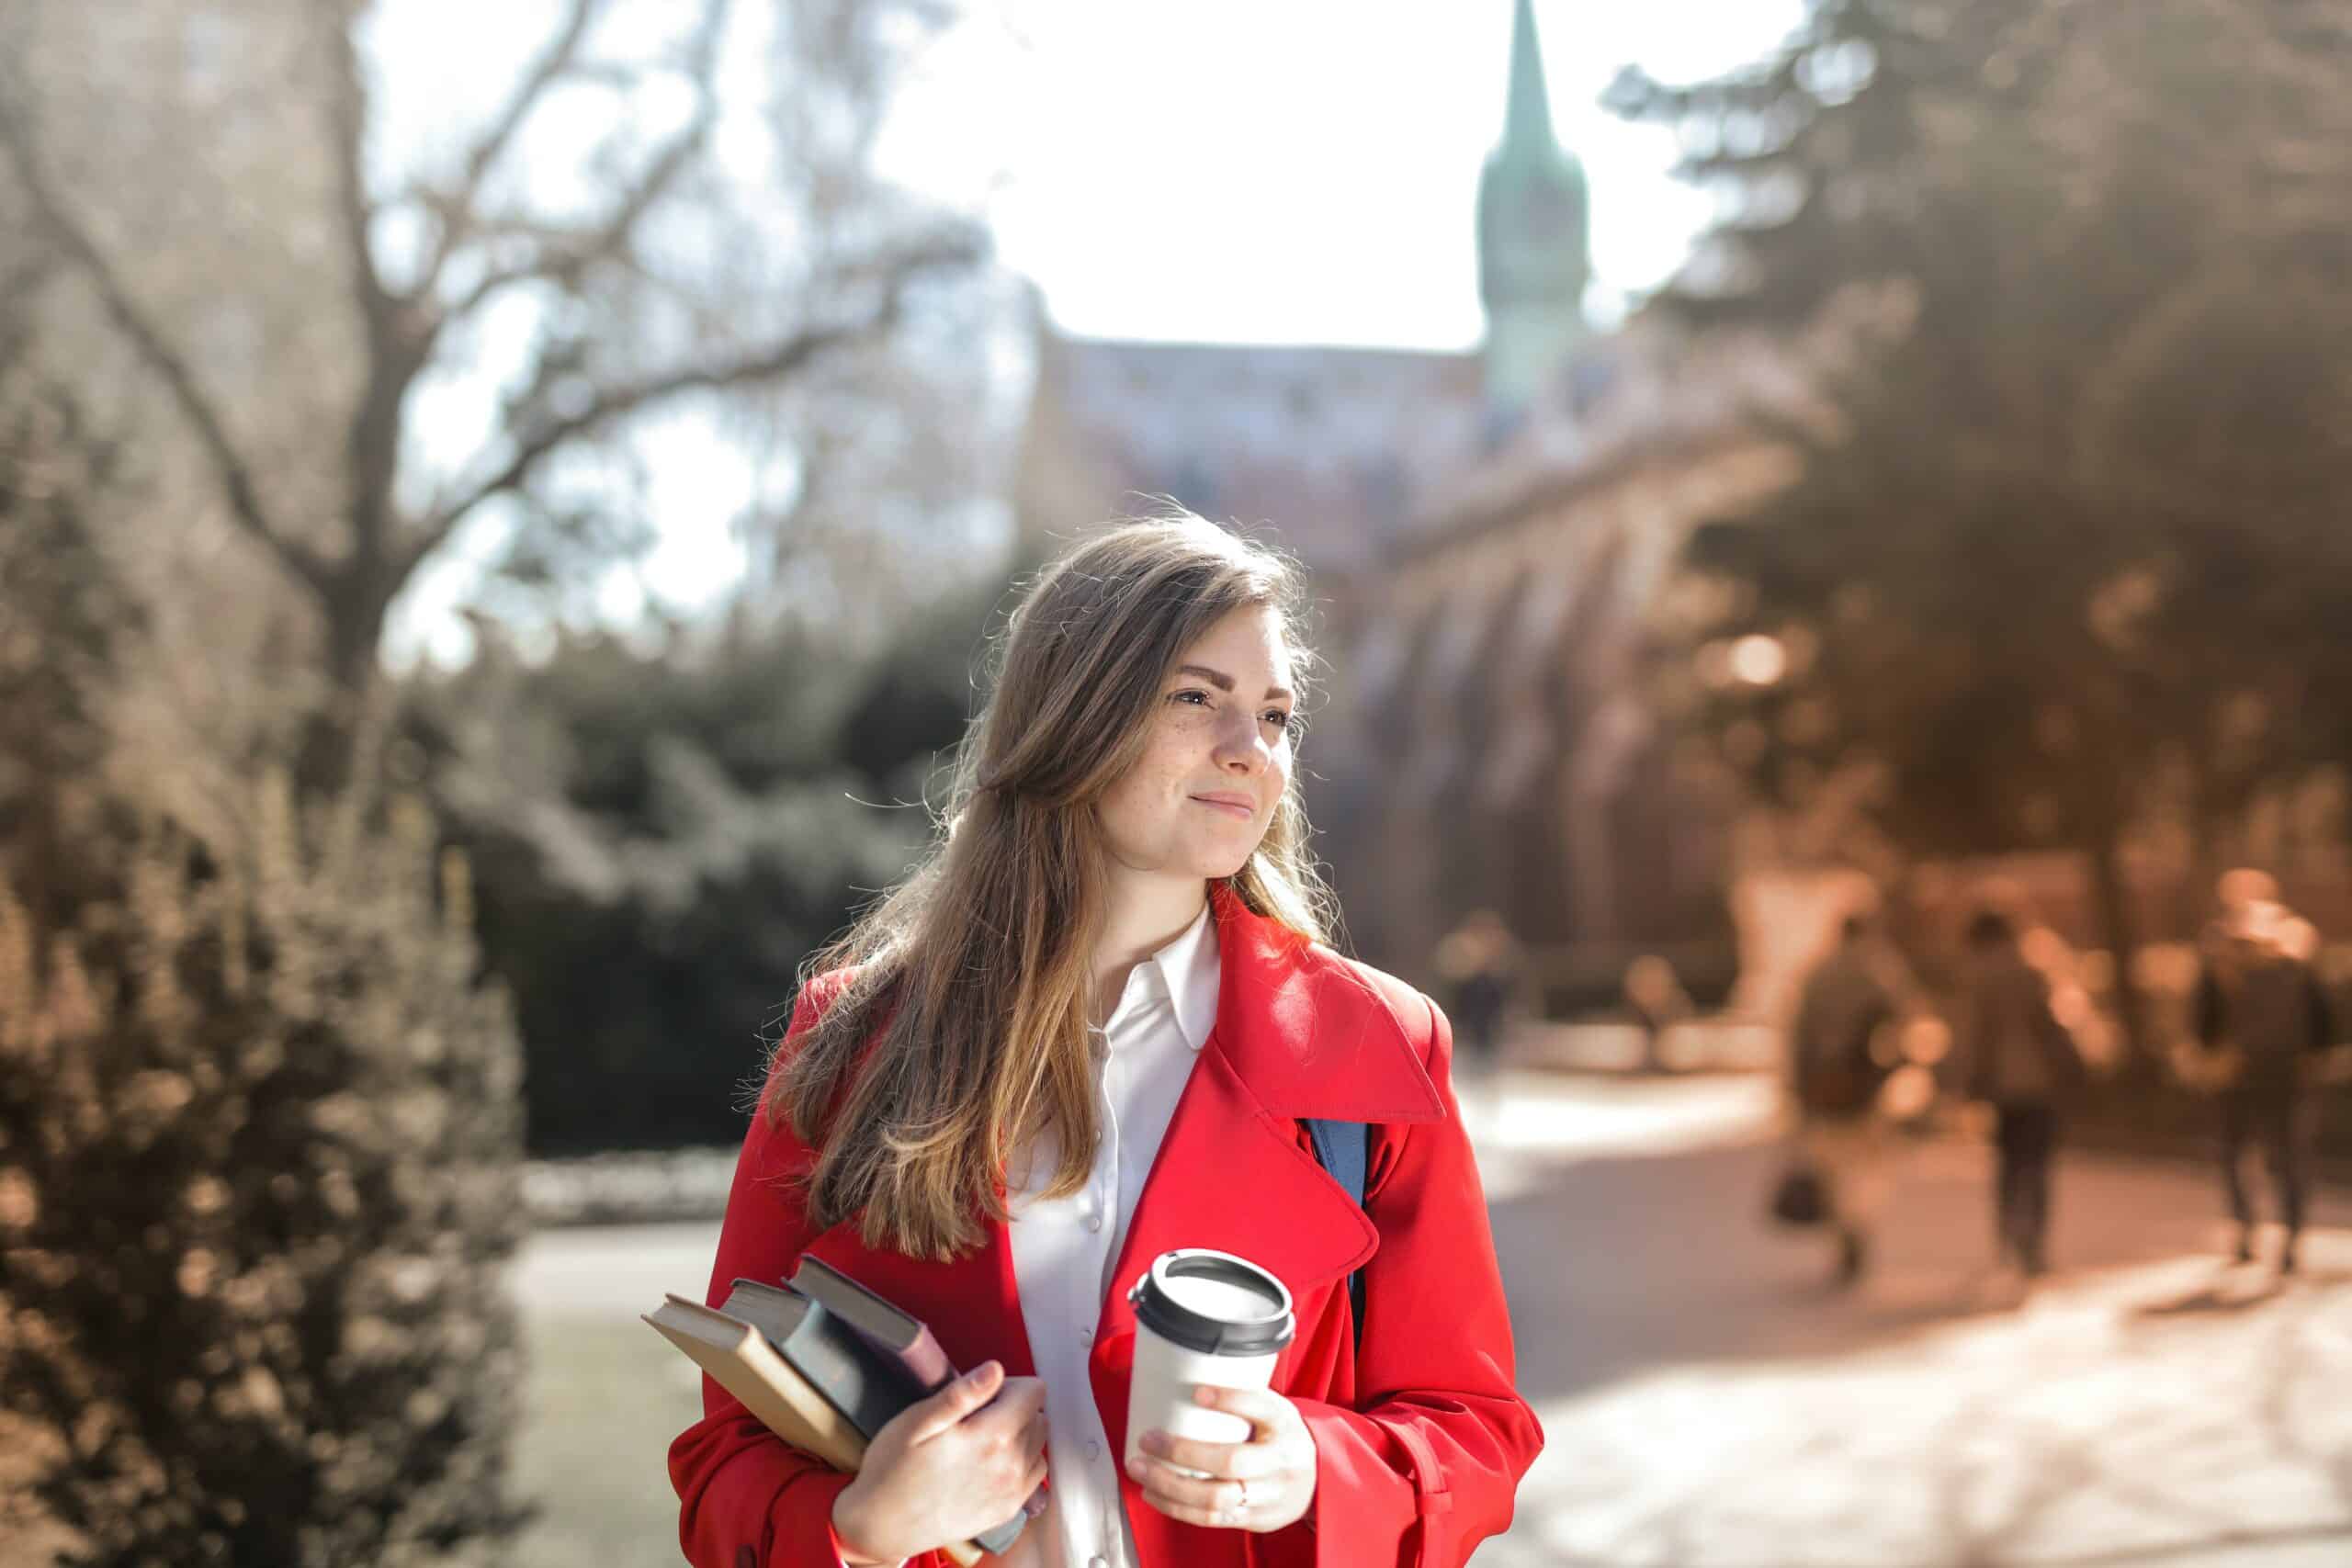 Student in a red blazer